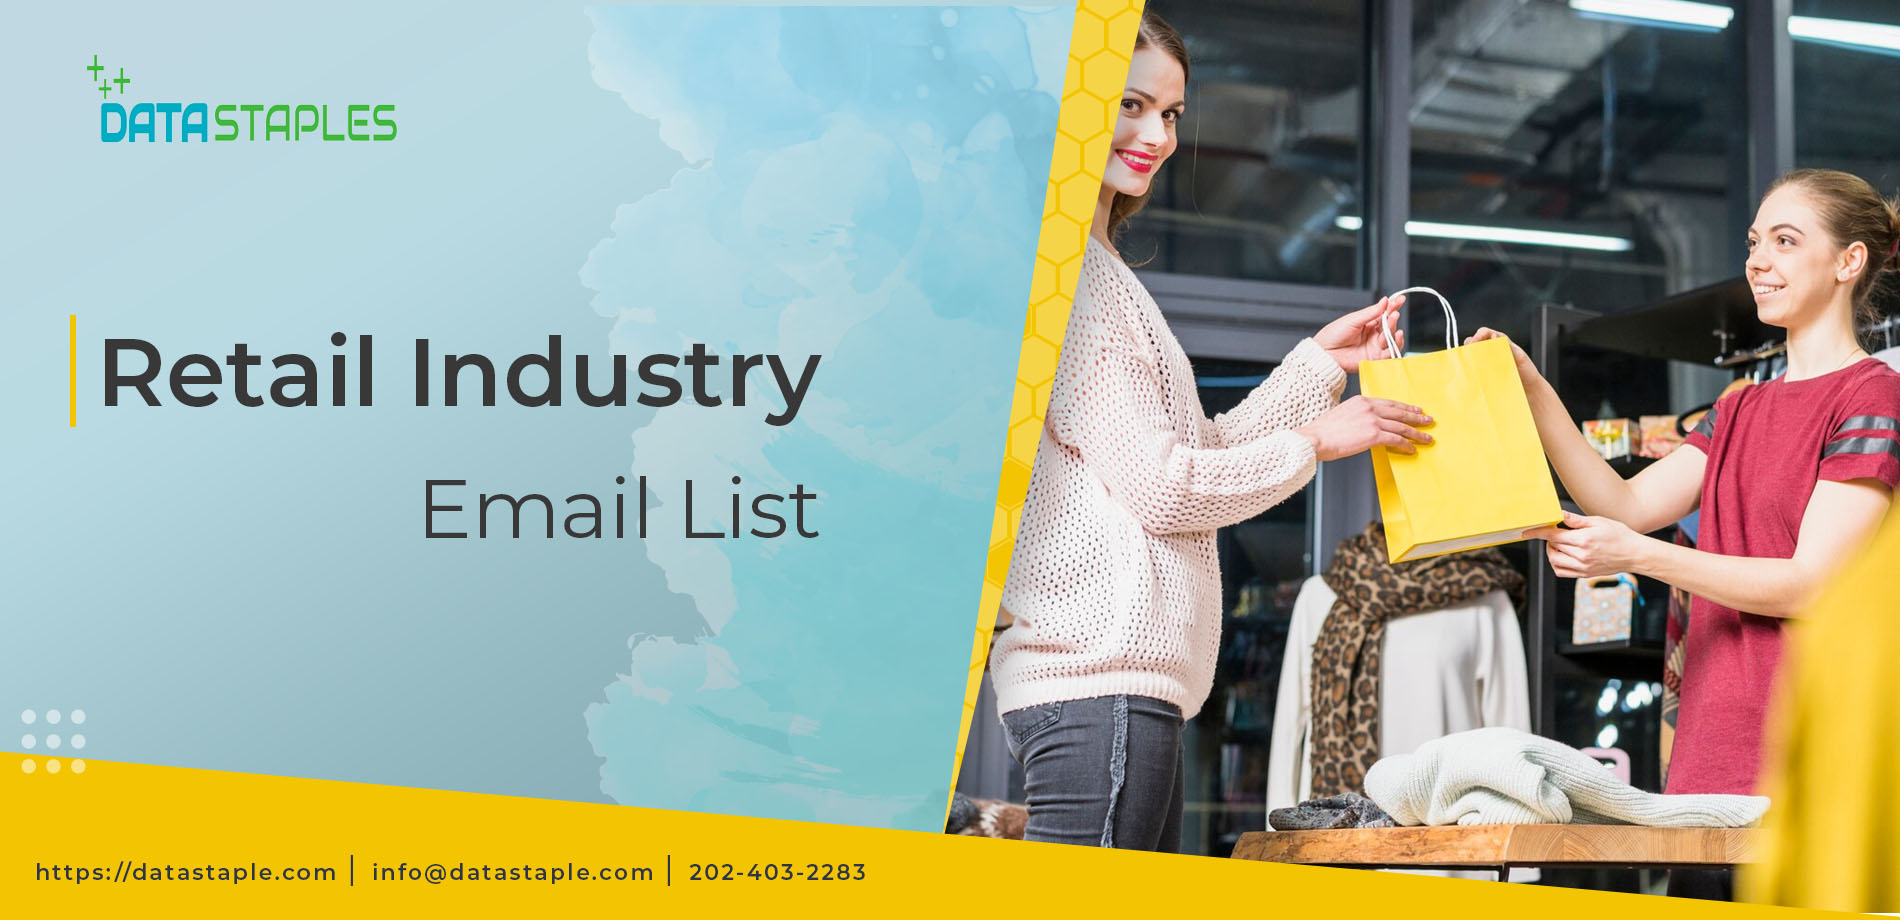 Retail Industry Email List | DataStaples